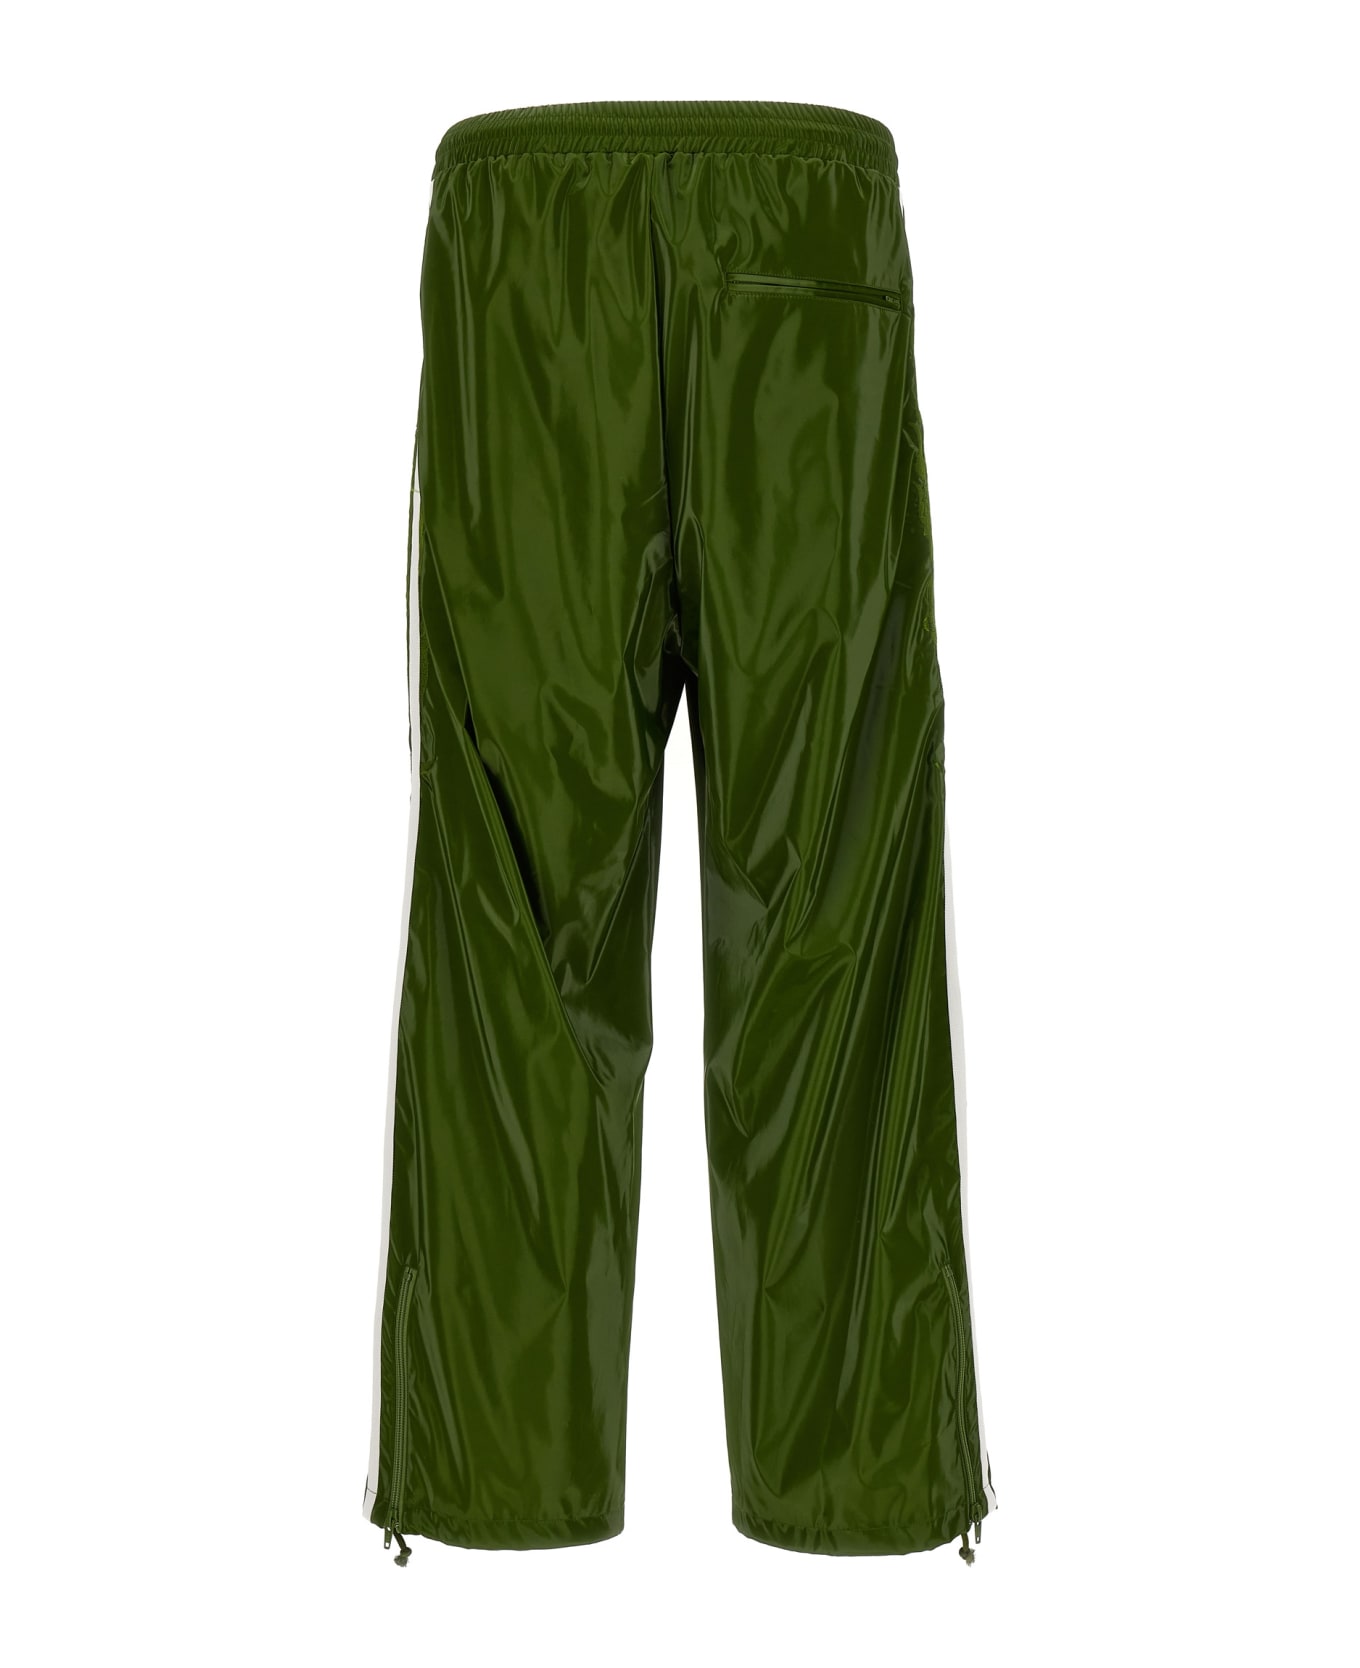 doublet 'laminate Track' Joggers - Green ボトムス